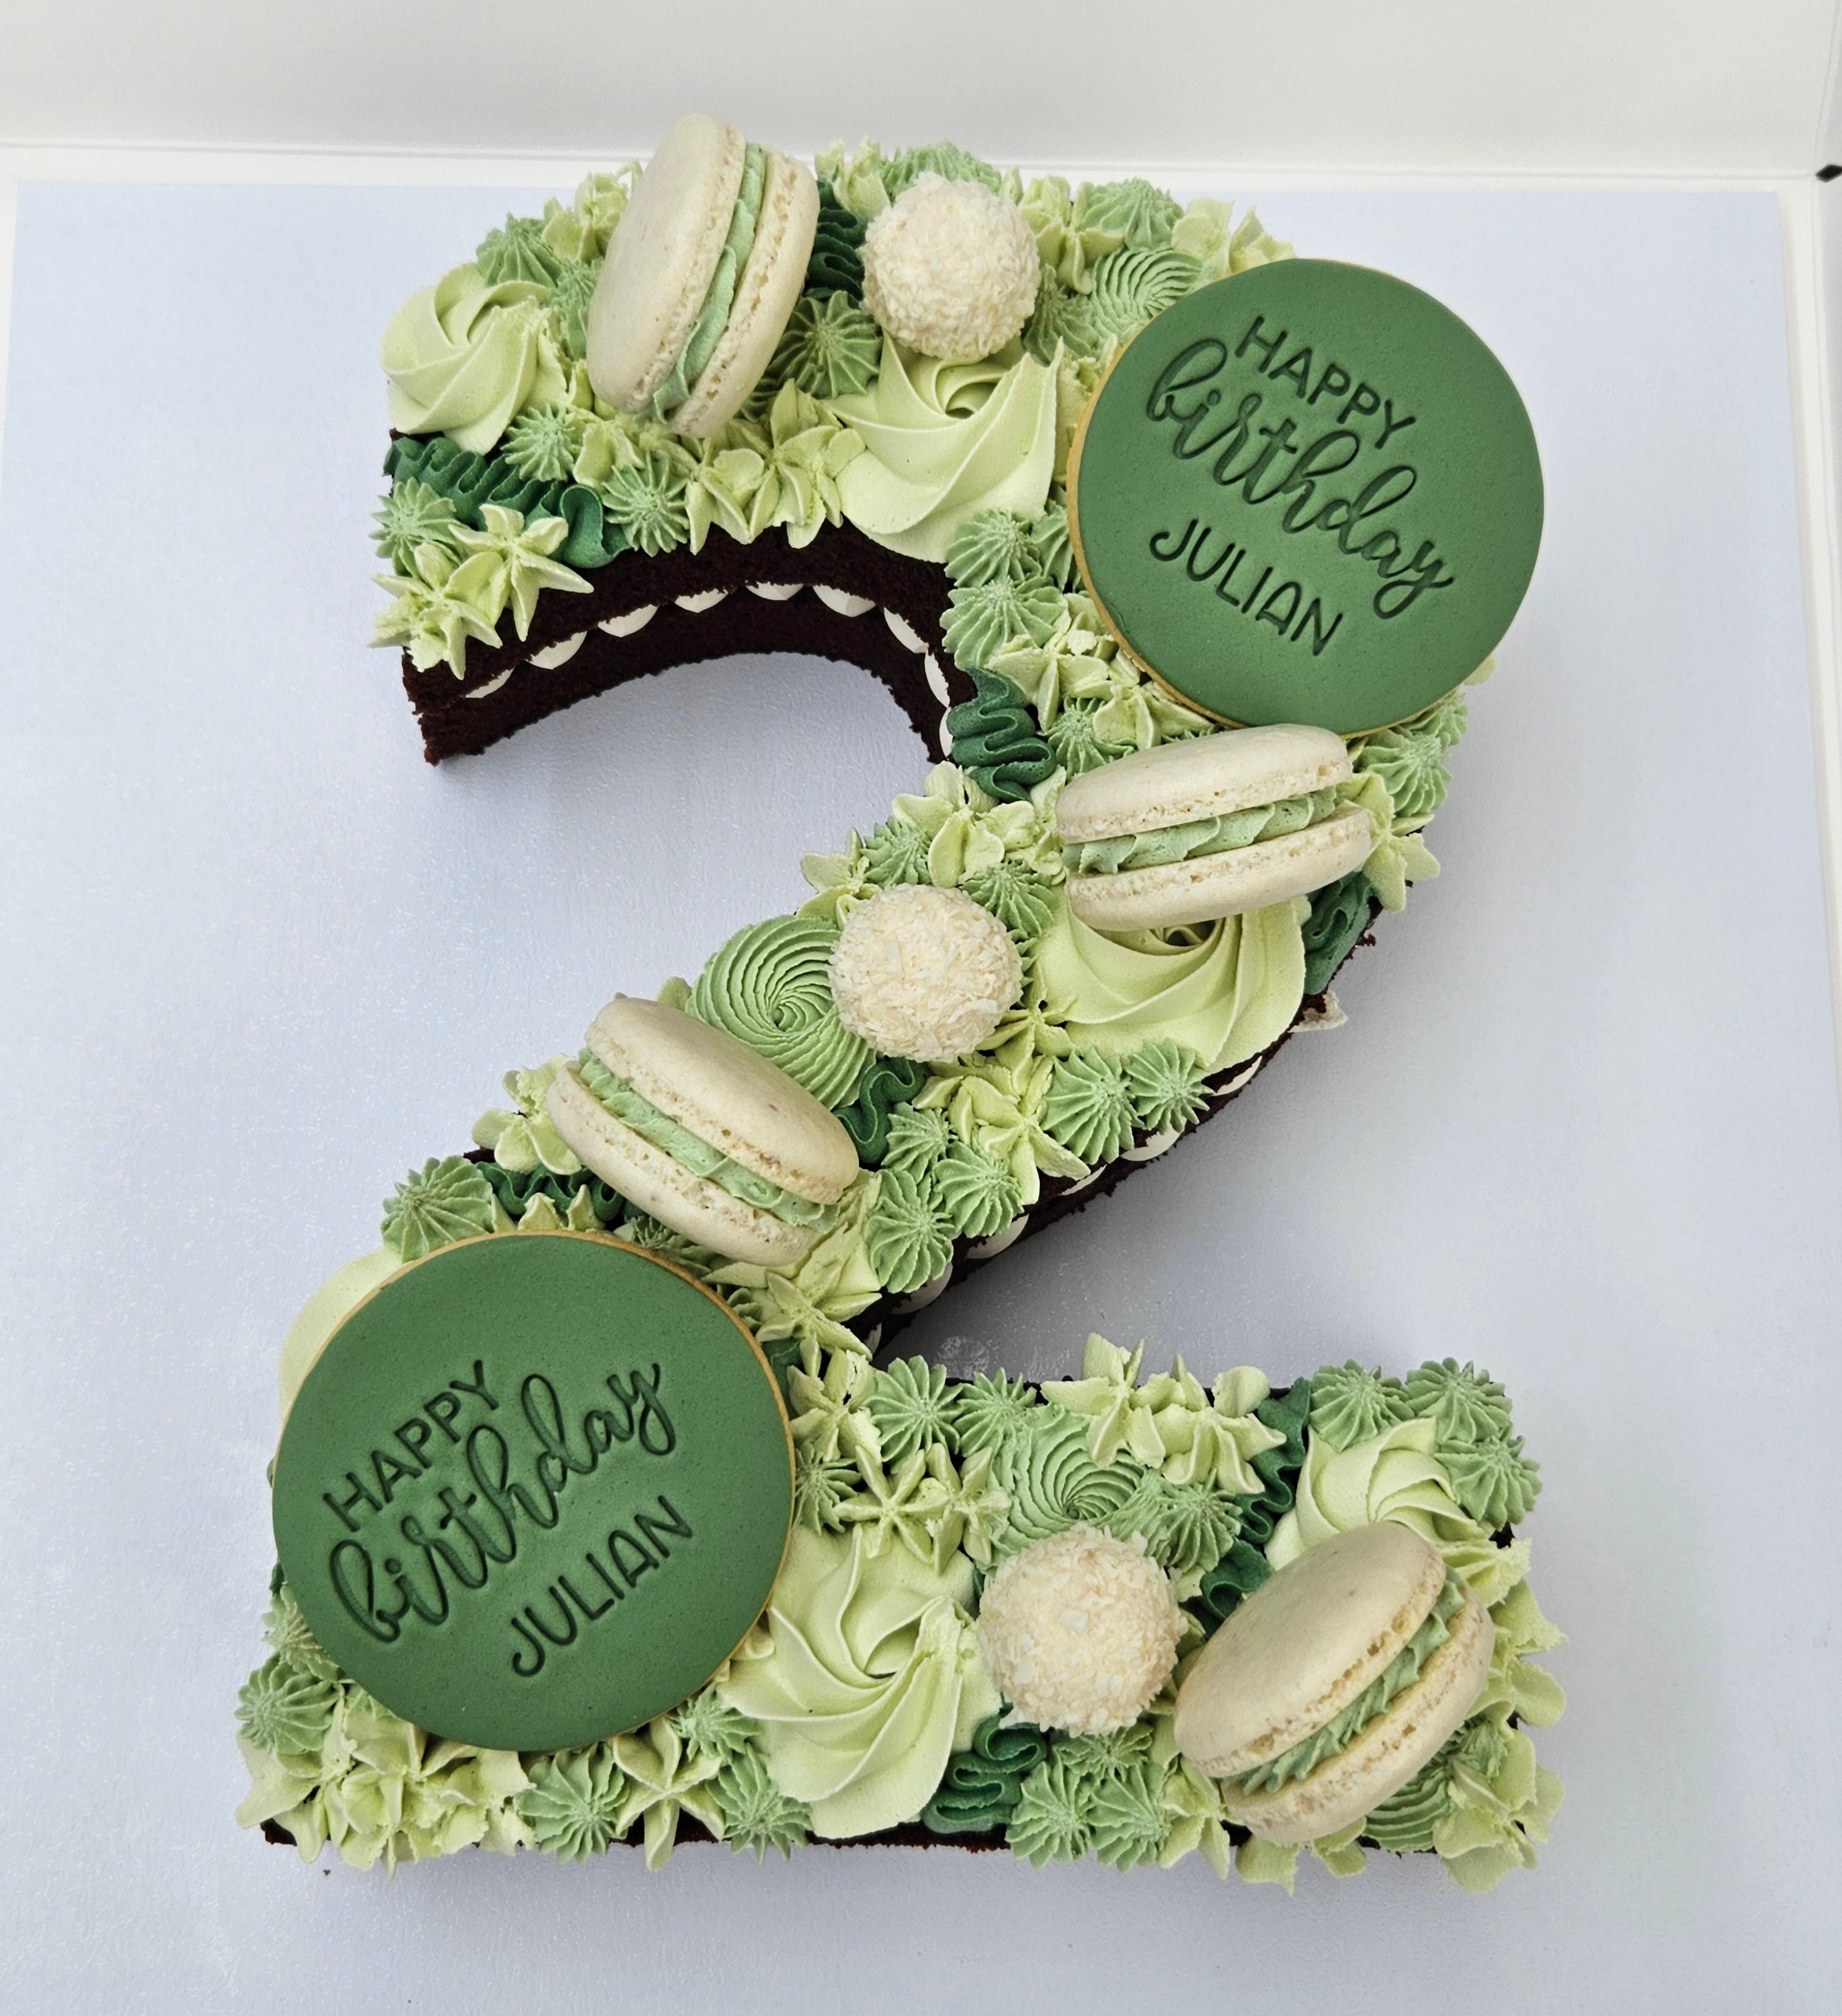 Jungle Themed Number One Cake | www.thecustomcakeshop.co.uk … | Flickr